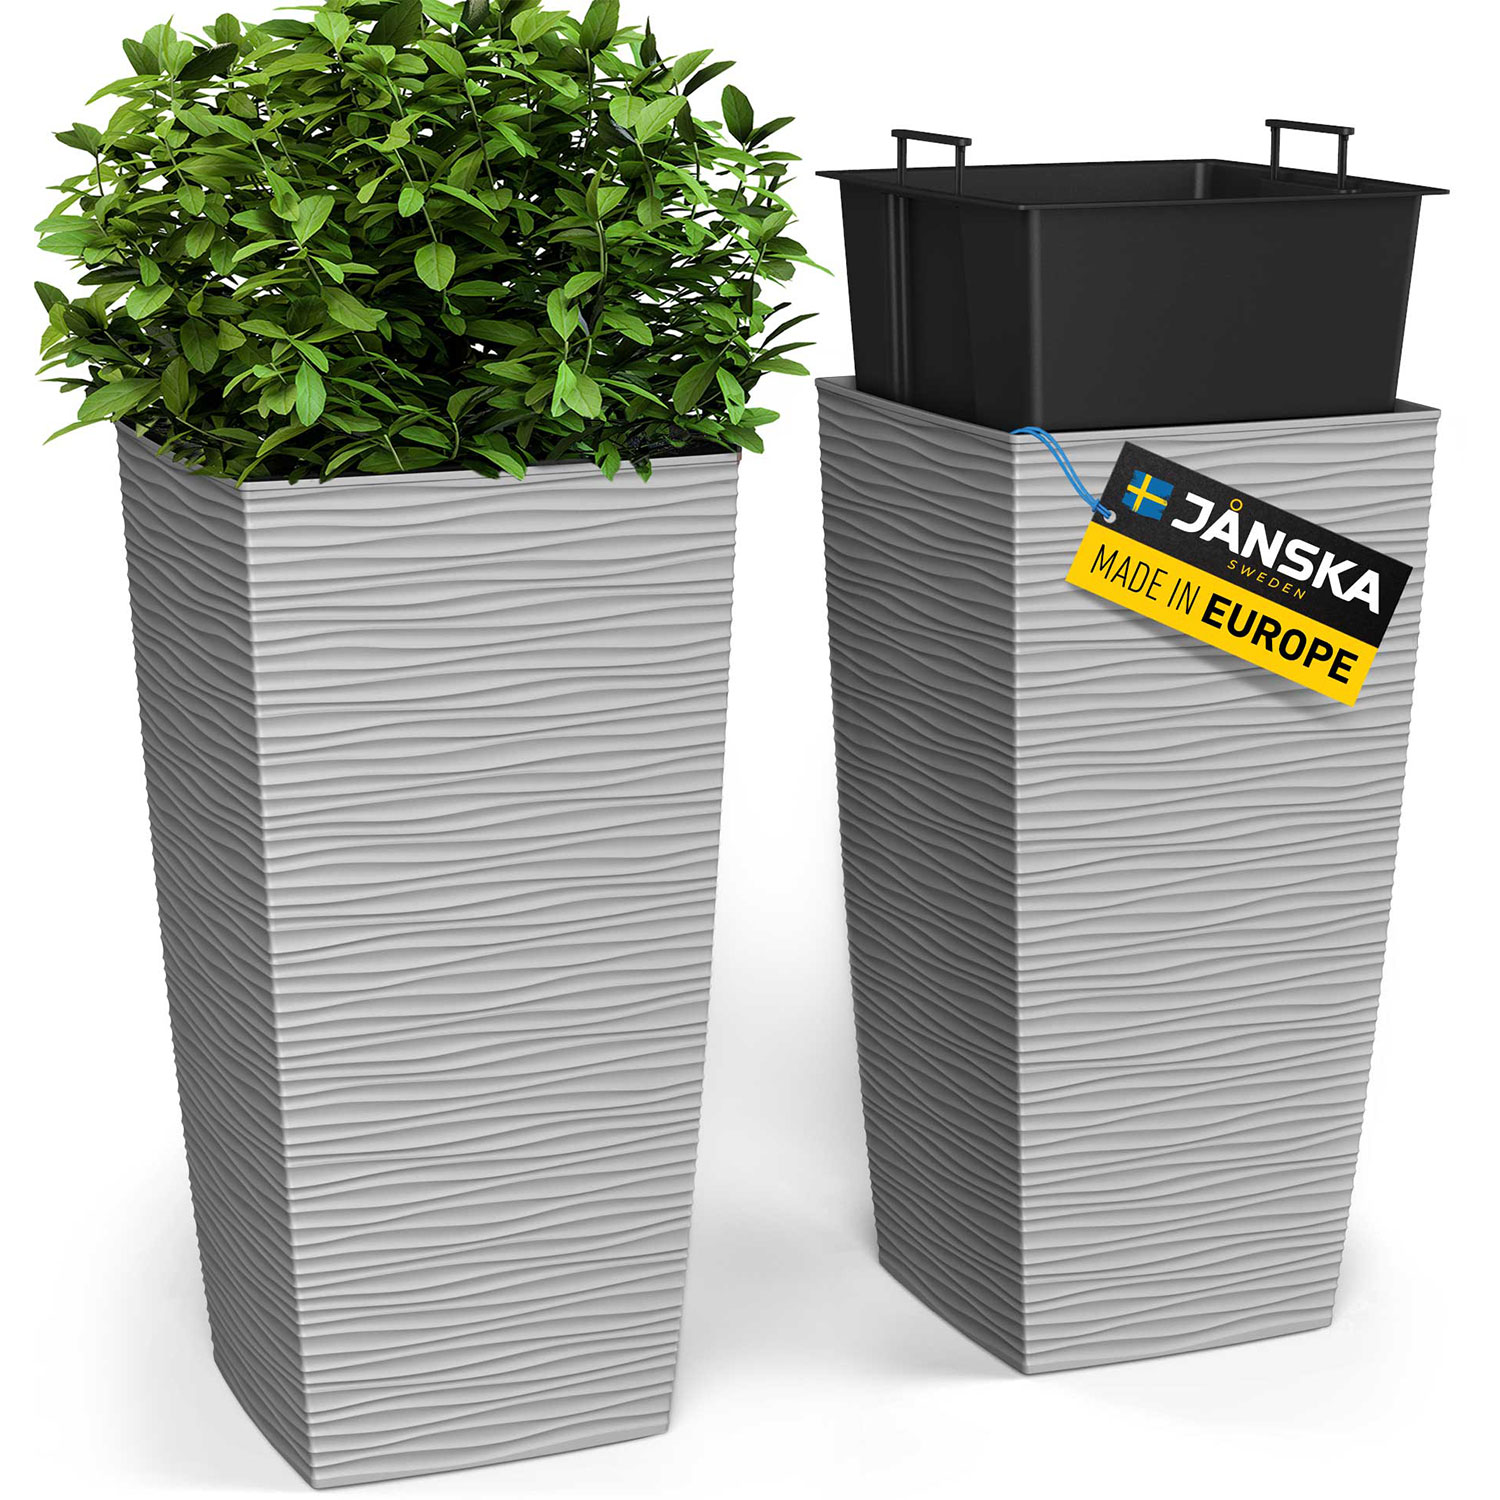 00a-Evergreen-Flower-planters-pots-NEW-gray-UPLOAD